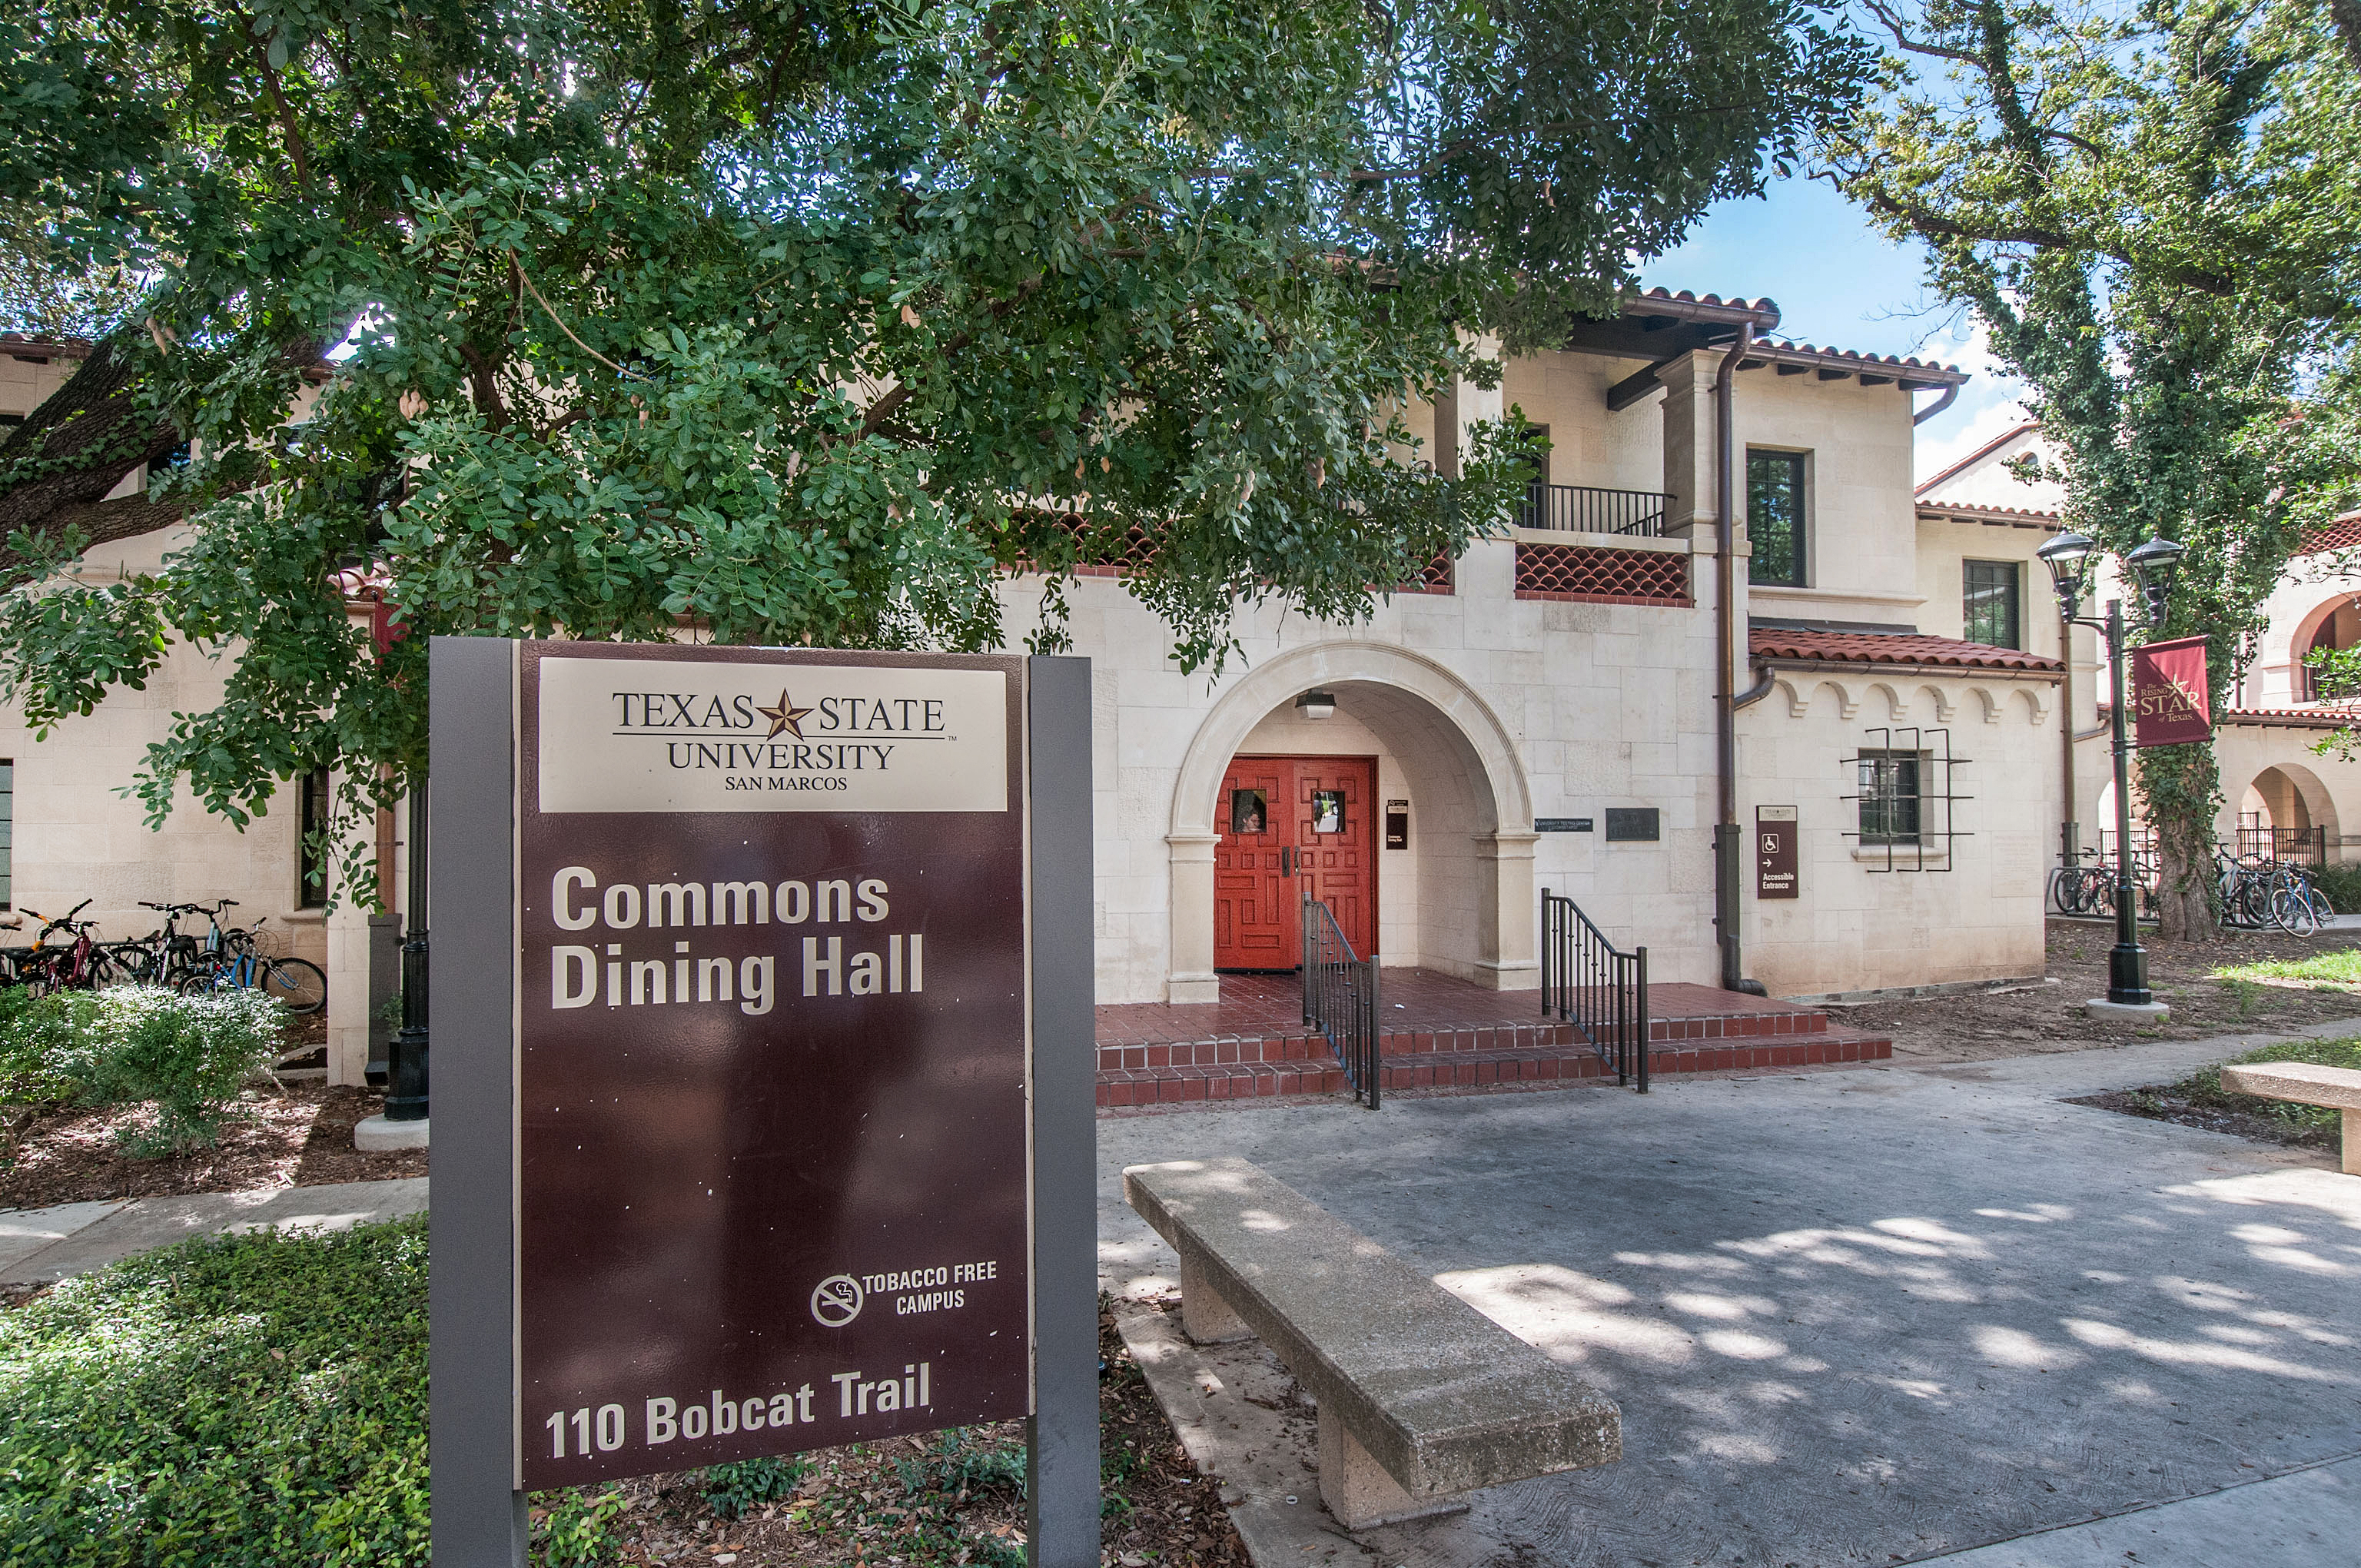  Texas State University | Commons Dining Hall category